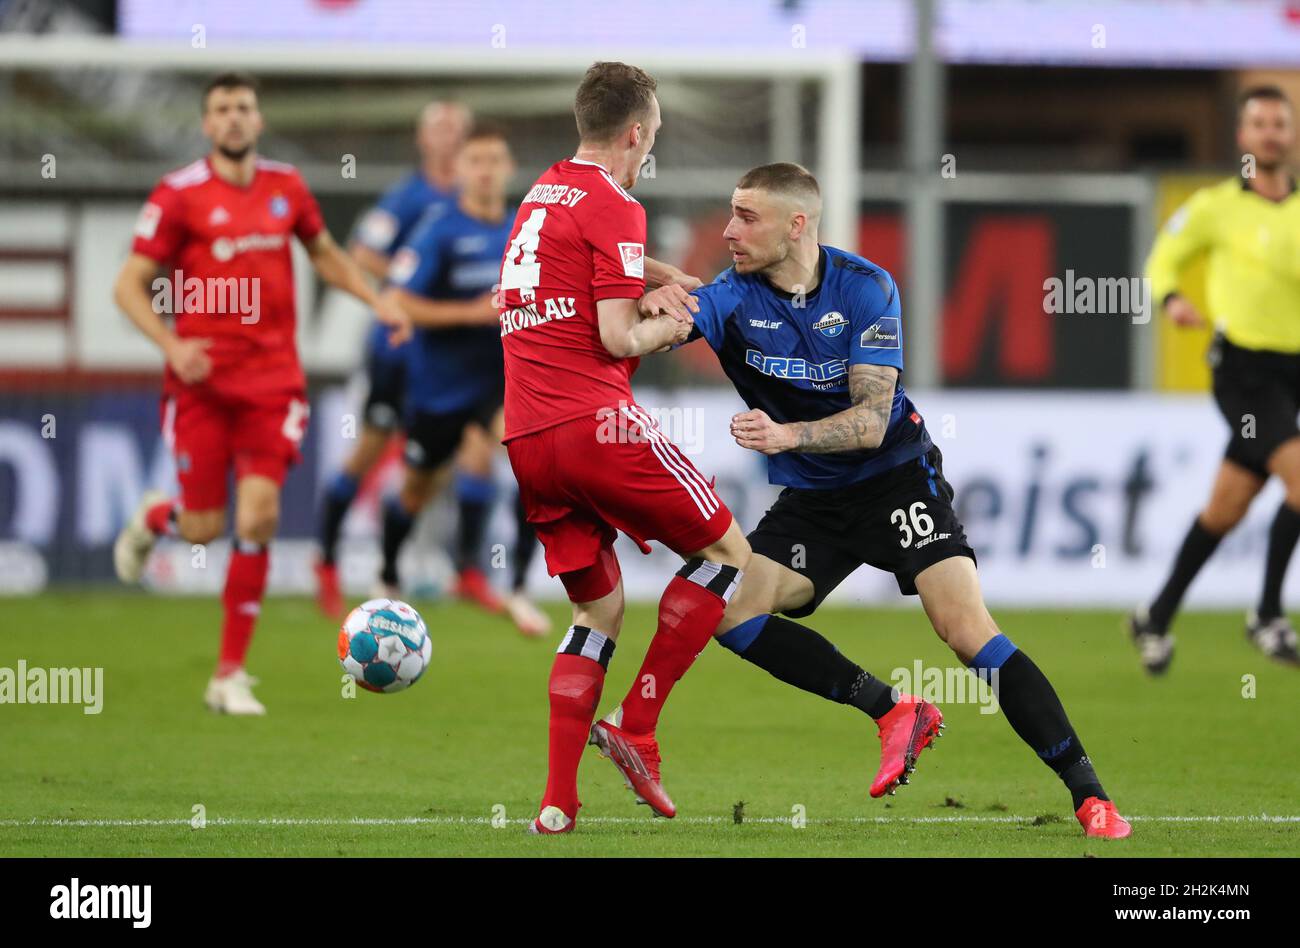 Paderborn, Germany. 22nd Oct, 2021. Football: 2nd Bundesliga, SC Paderborn 07 - Hamburger SV, Matchday 11 at Benteler Arena. Paderborn's Felix Platte (r) fights for the ball with Hamburg's Sebastian Schonlau (l). Credit: Friso Gentsch/dpa - IMPORTANT NOTE: In accordance with the regulations of the DFL Deutsche Fußball Liga and/or the DFB Deutscher Fußball-Bund, it is prohibited to use or have used photographs taken in the stadium and/or of the match in the form of sequence pictures and/or video-like photo series./dpa/Alamy Live News Stock Photo